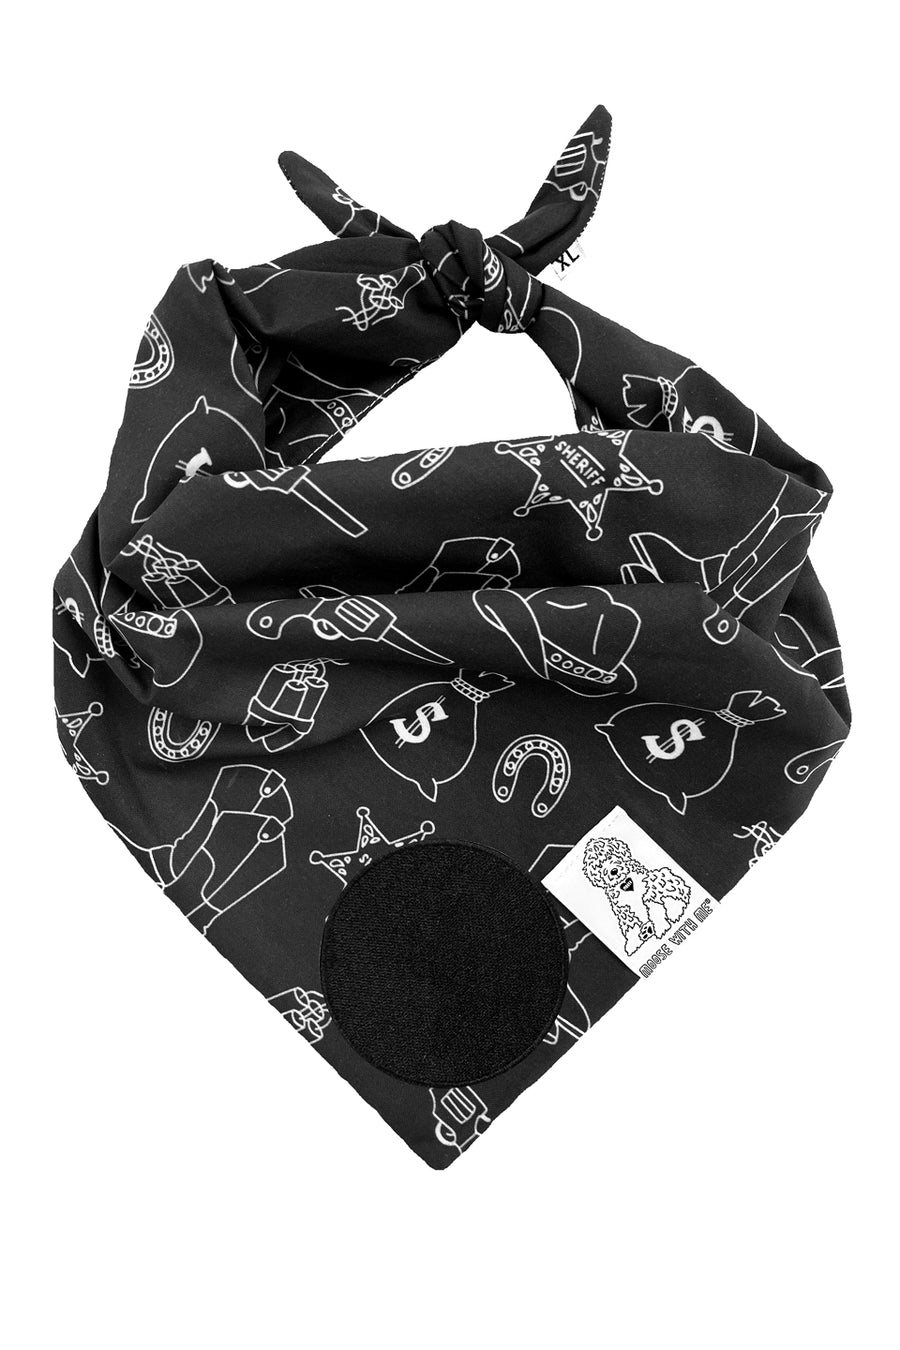 Dog Bandana Western - Customize with Interchangeable Velcro Patches